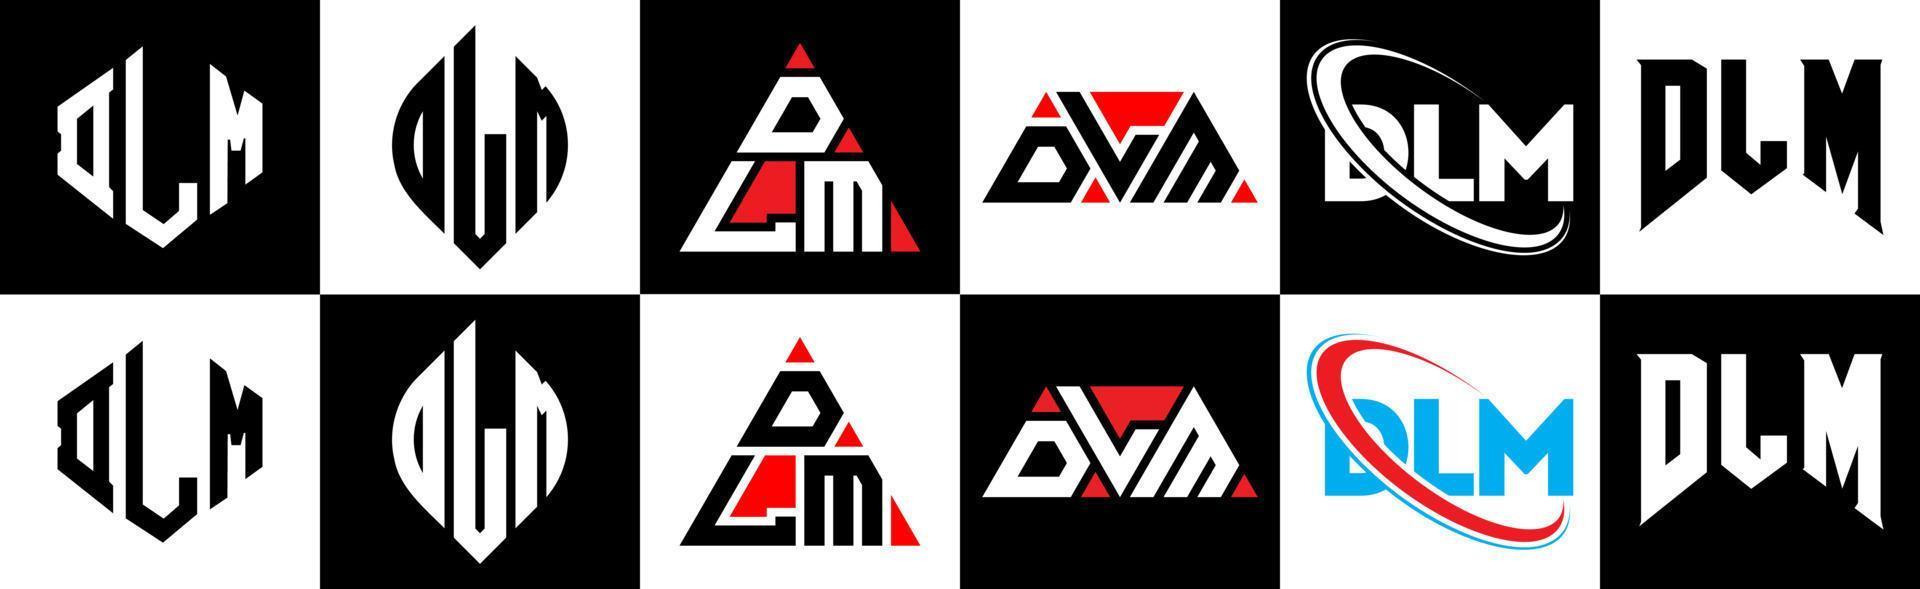 DLM letter logo design in six style. DLM polygon, circle, triangle, hexagon, flat and simple style with black and white color variation letter logo set in one artboard. DLM minimalist and classic logo vector